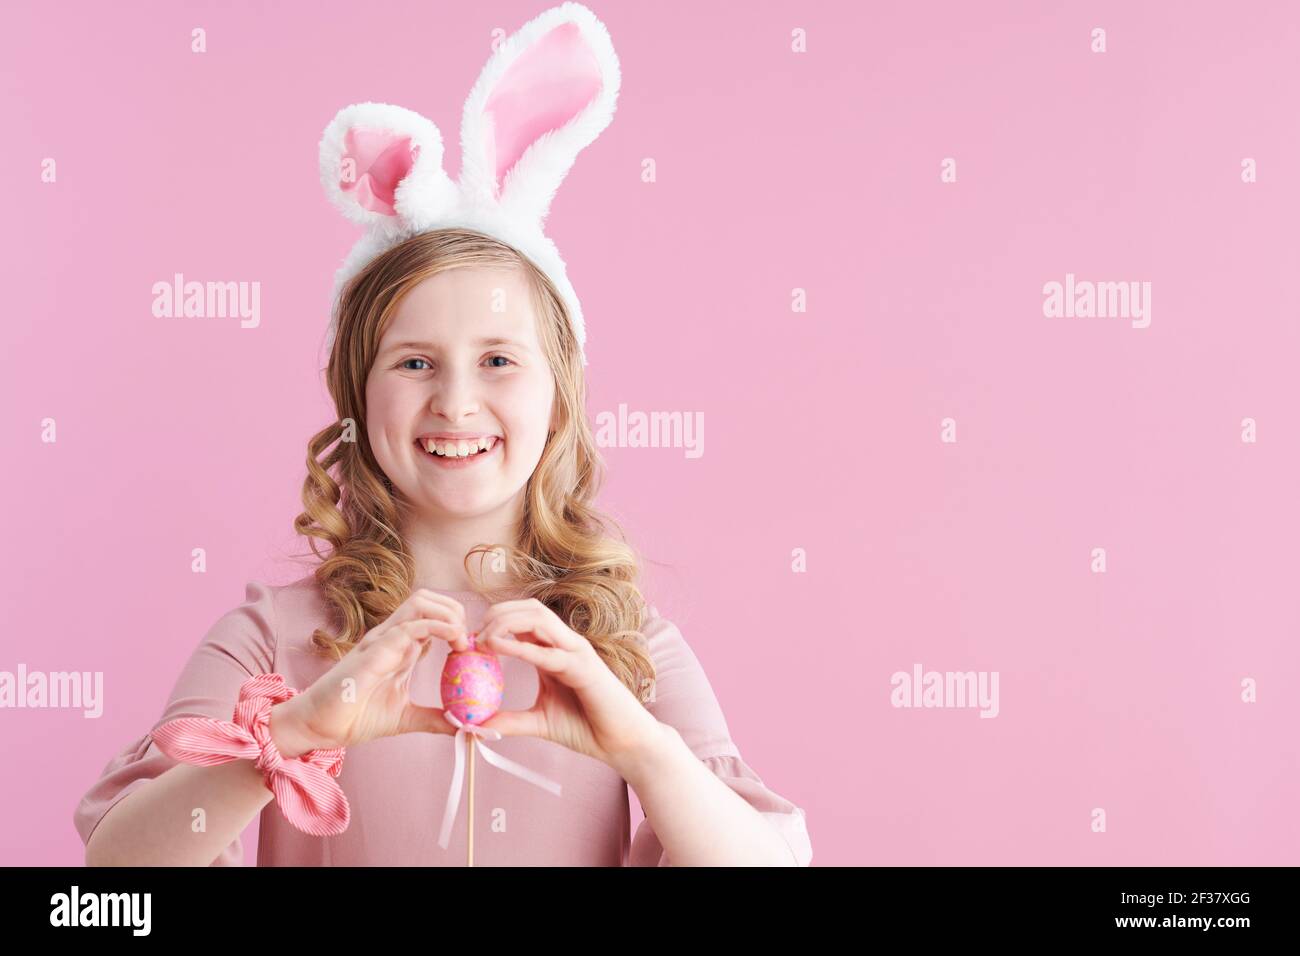 Portrait of happy stylish child in pink dress with bunny ears and easter egg against pink background. Stock Photo